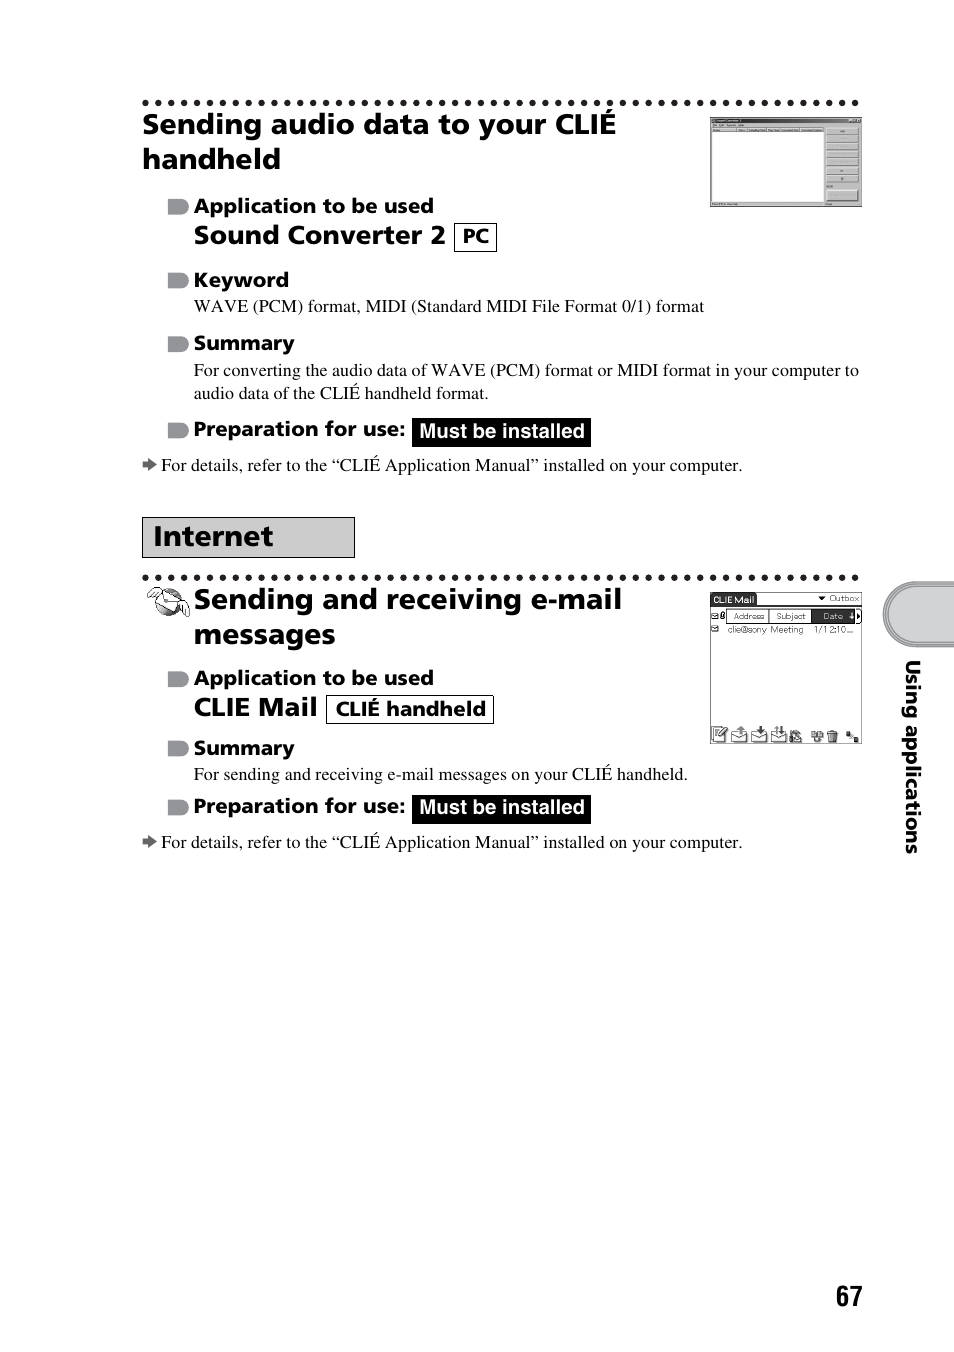 Sending audio data to your clié handheld, Sending and receiving e-mail messages, Internet | Sound converter 2, Clie mail | Sony PEG-TG50 User Manual | Page 67 / 100